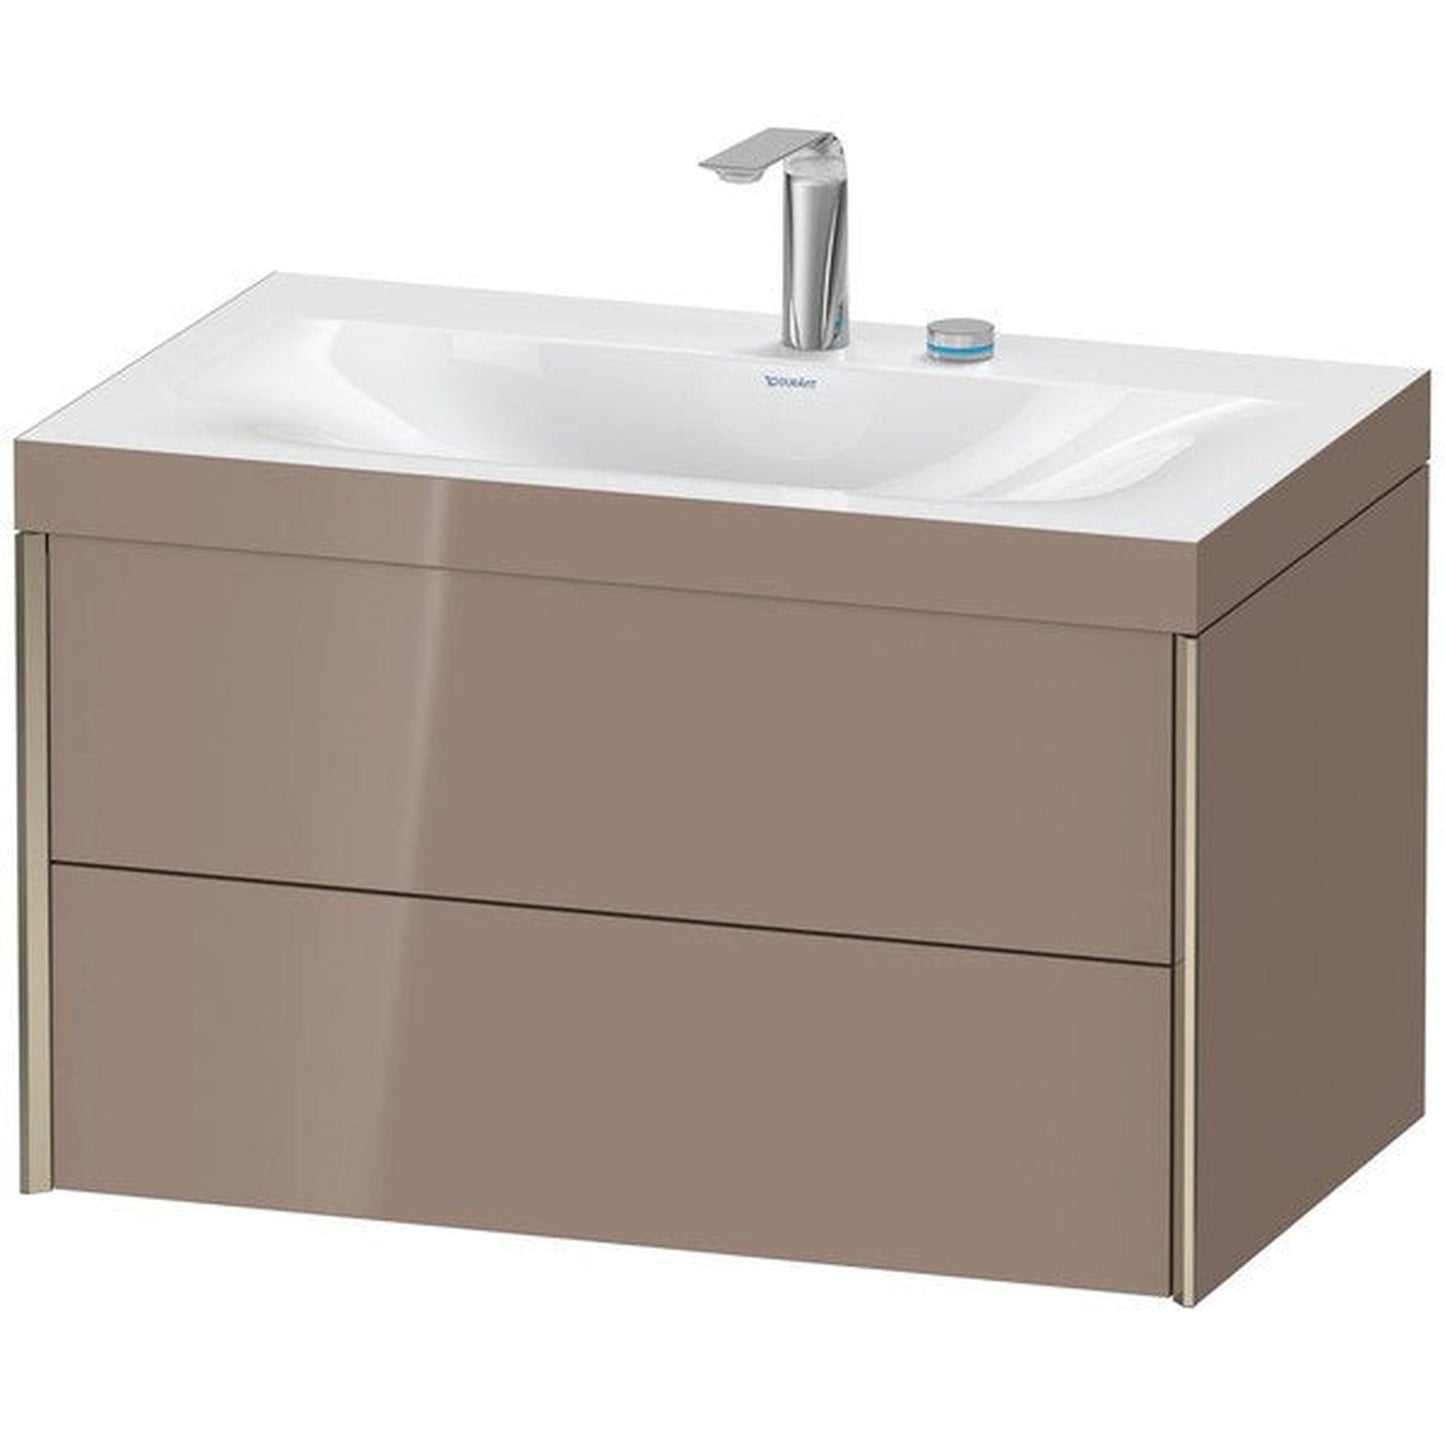 Duravit Xviu 31" x 20" x 19" Two Drawer C-Bonded Wall-Mount Vanity Kit With Two Tap Holes, Cappuccino (XV4615EB186C)